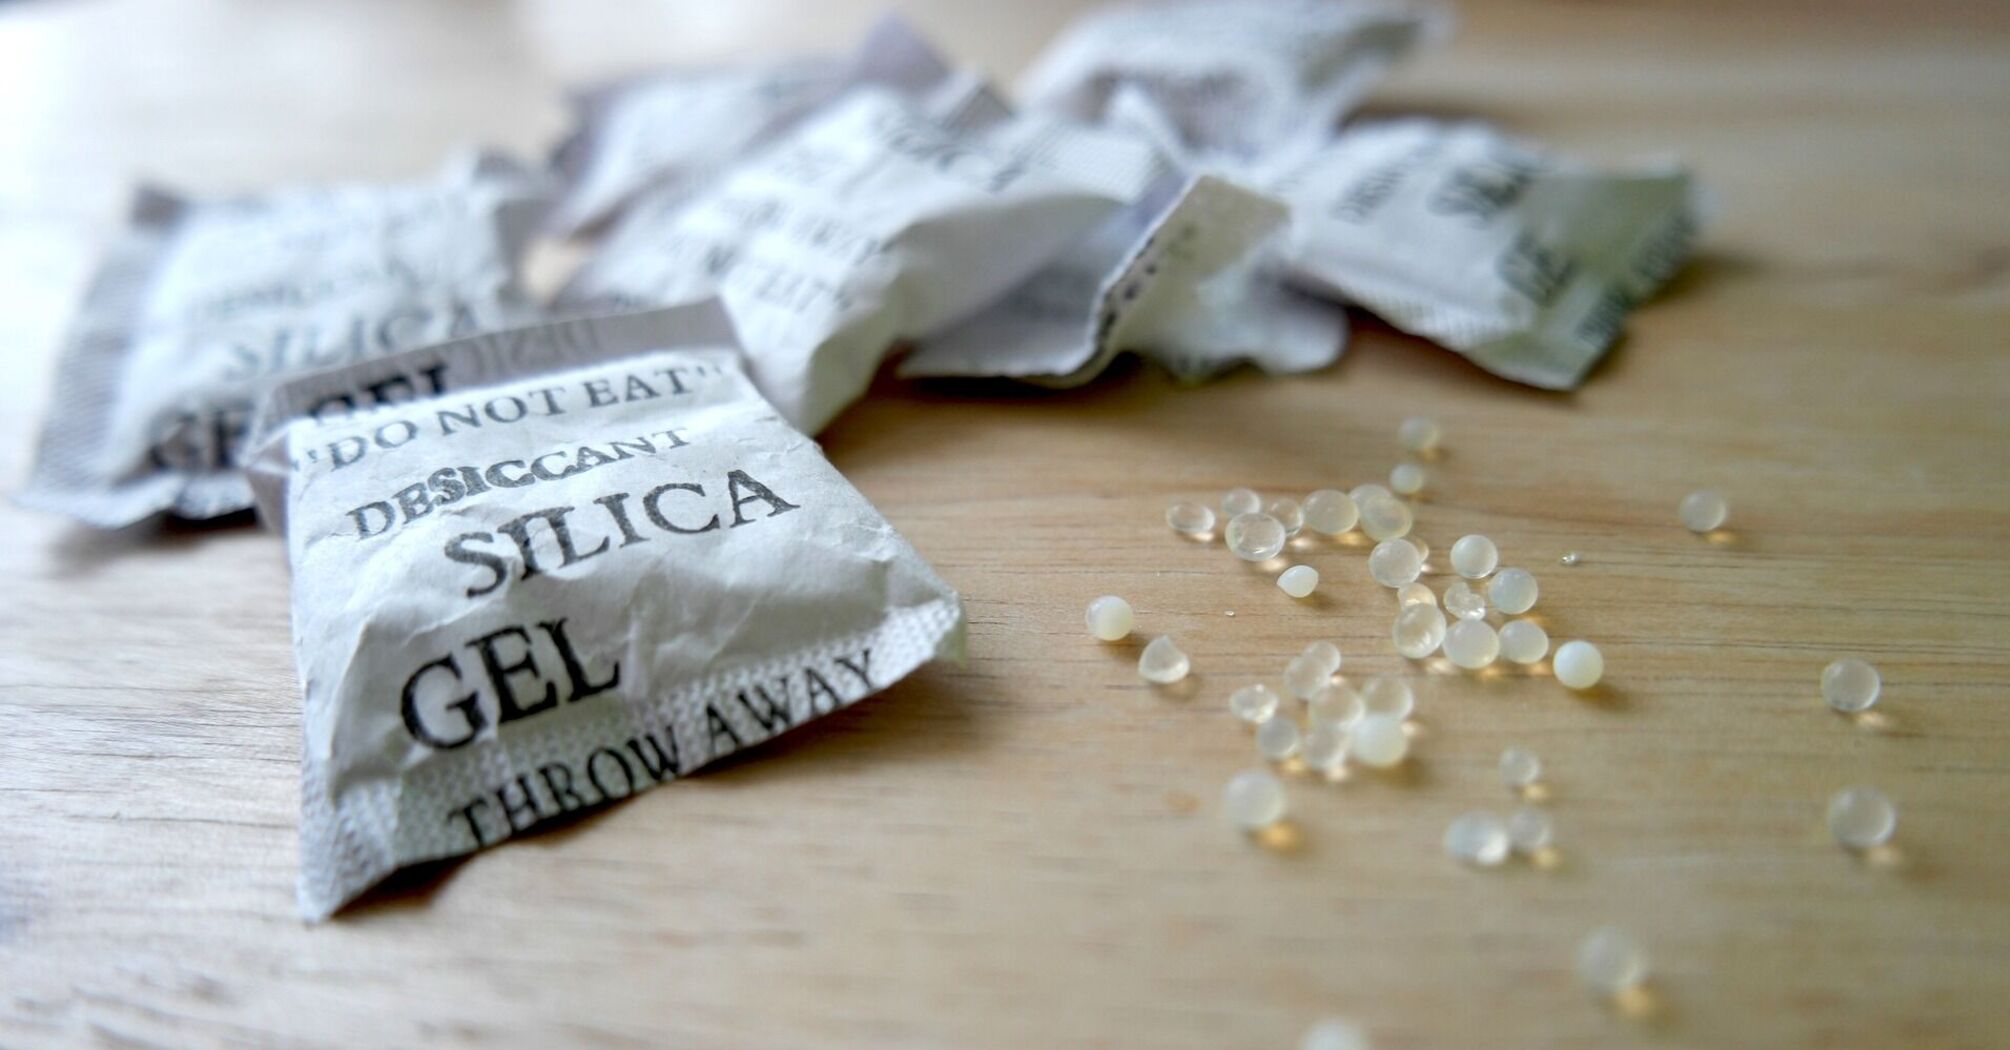 Can be useful around the house: how to use silica gel sachets